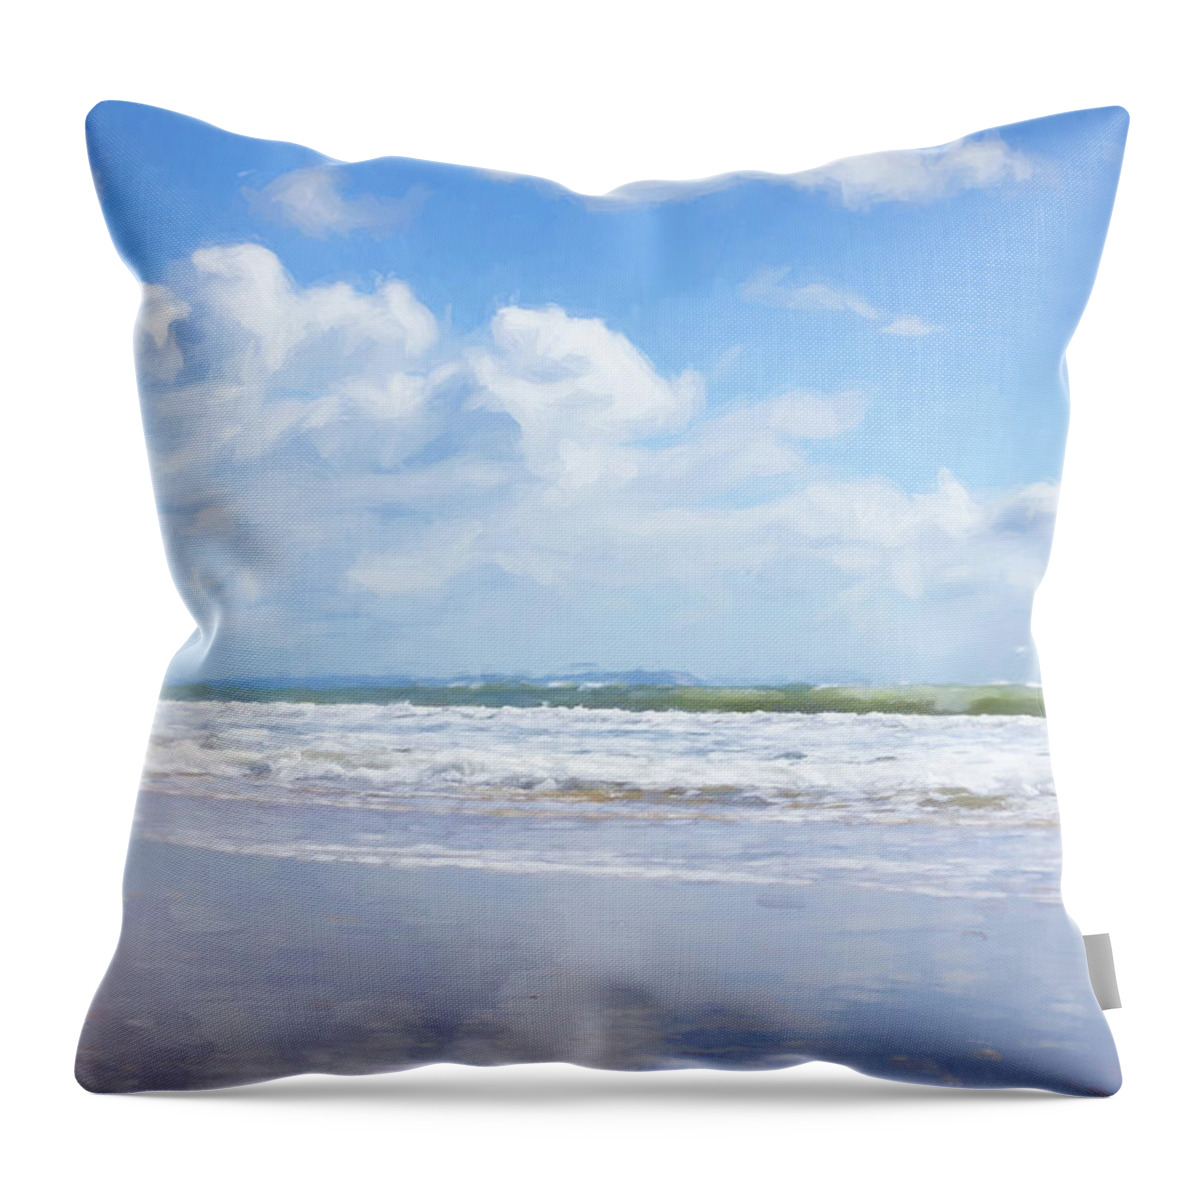 Bournemouth Beach Throw Pillow featuring the photograph The Seaside by Tanya C Smith